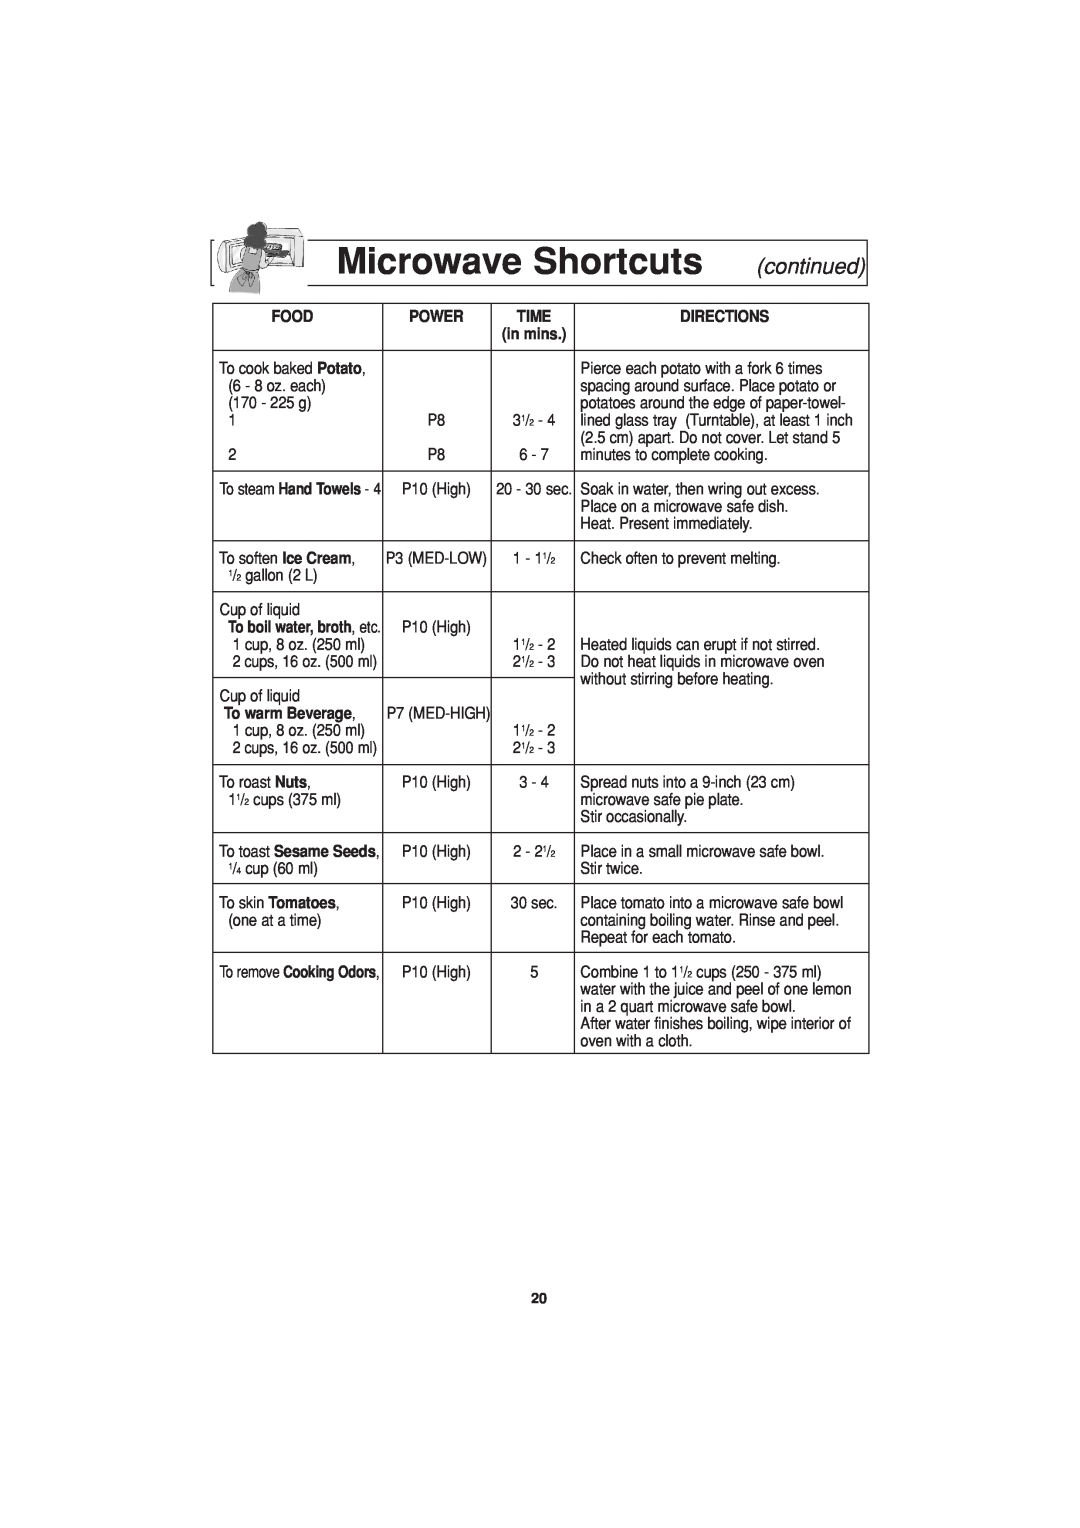 Panasonic NN-H604, NN-H614, NN-H504 Microwave Shortcuts, continued, Food, Directions, To warm Beverage 